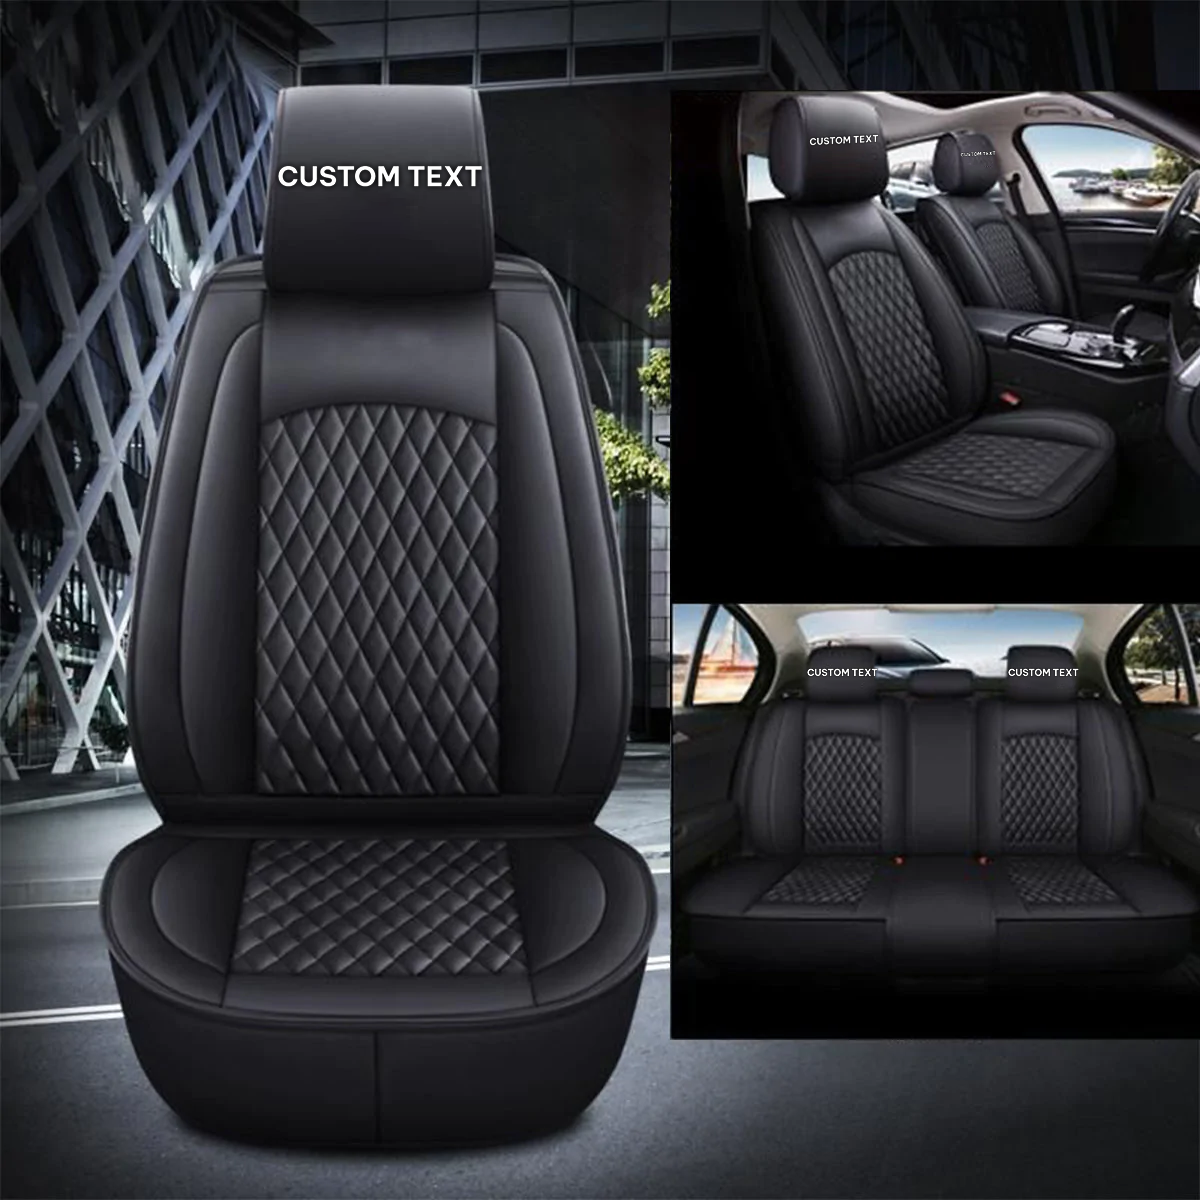 Custom Text For Seat Covers 5 Seats Full Set, Custom Fit For Your Cars, Leatherette Automotive Seat Cushion Protector Universal Fit, Vehicle Auto Interior Decor MG13988